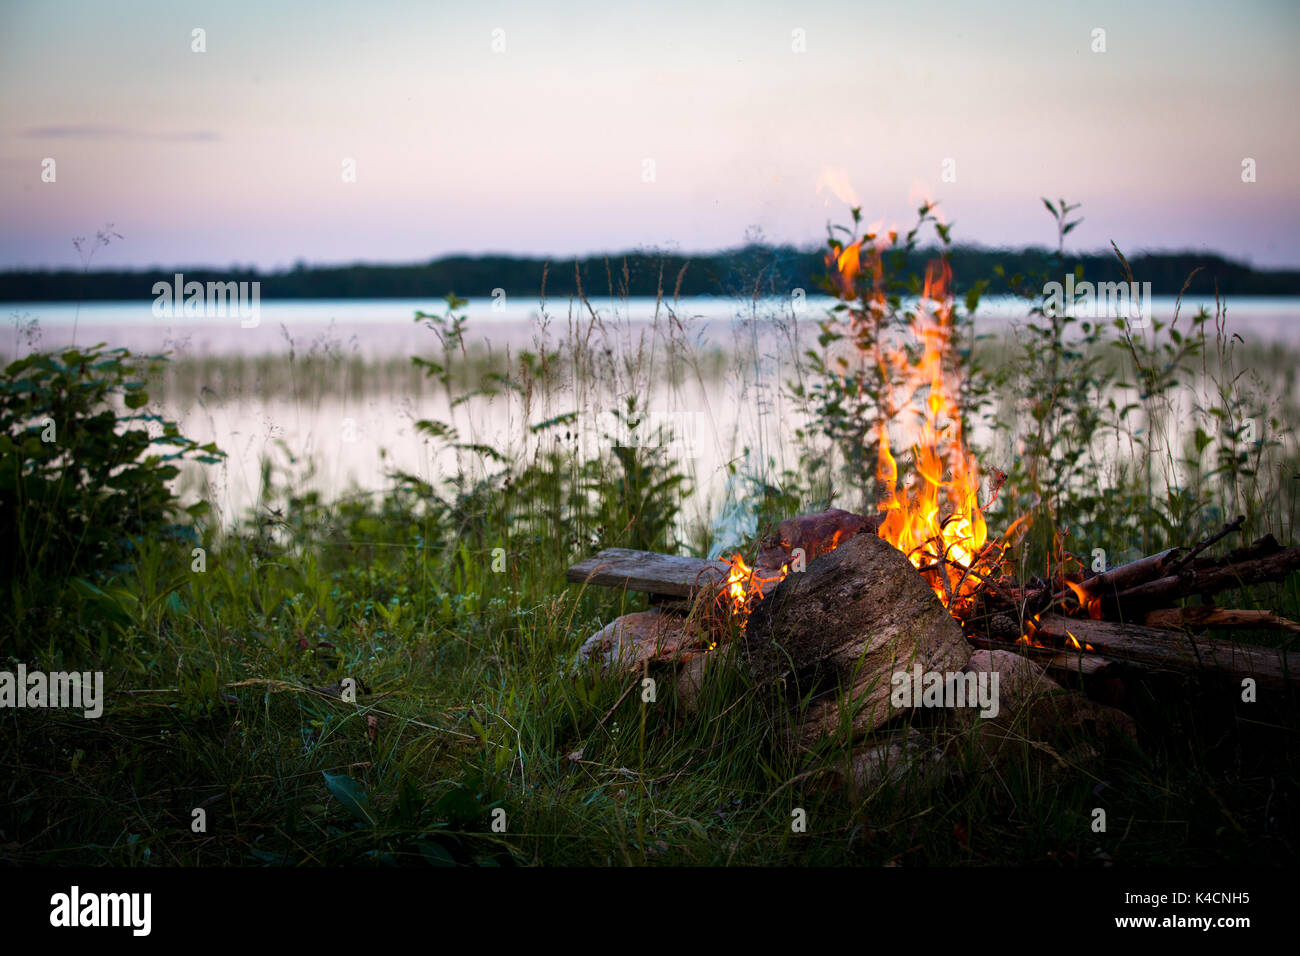 Campfire At A Lake In Sweden Stock Photo